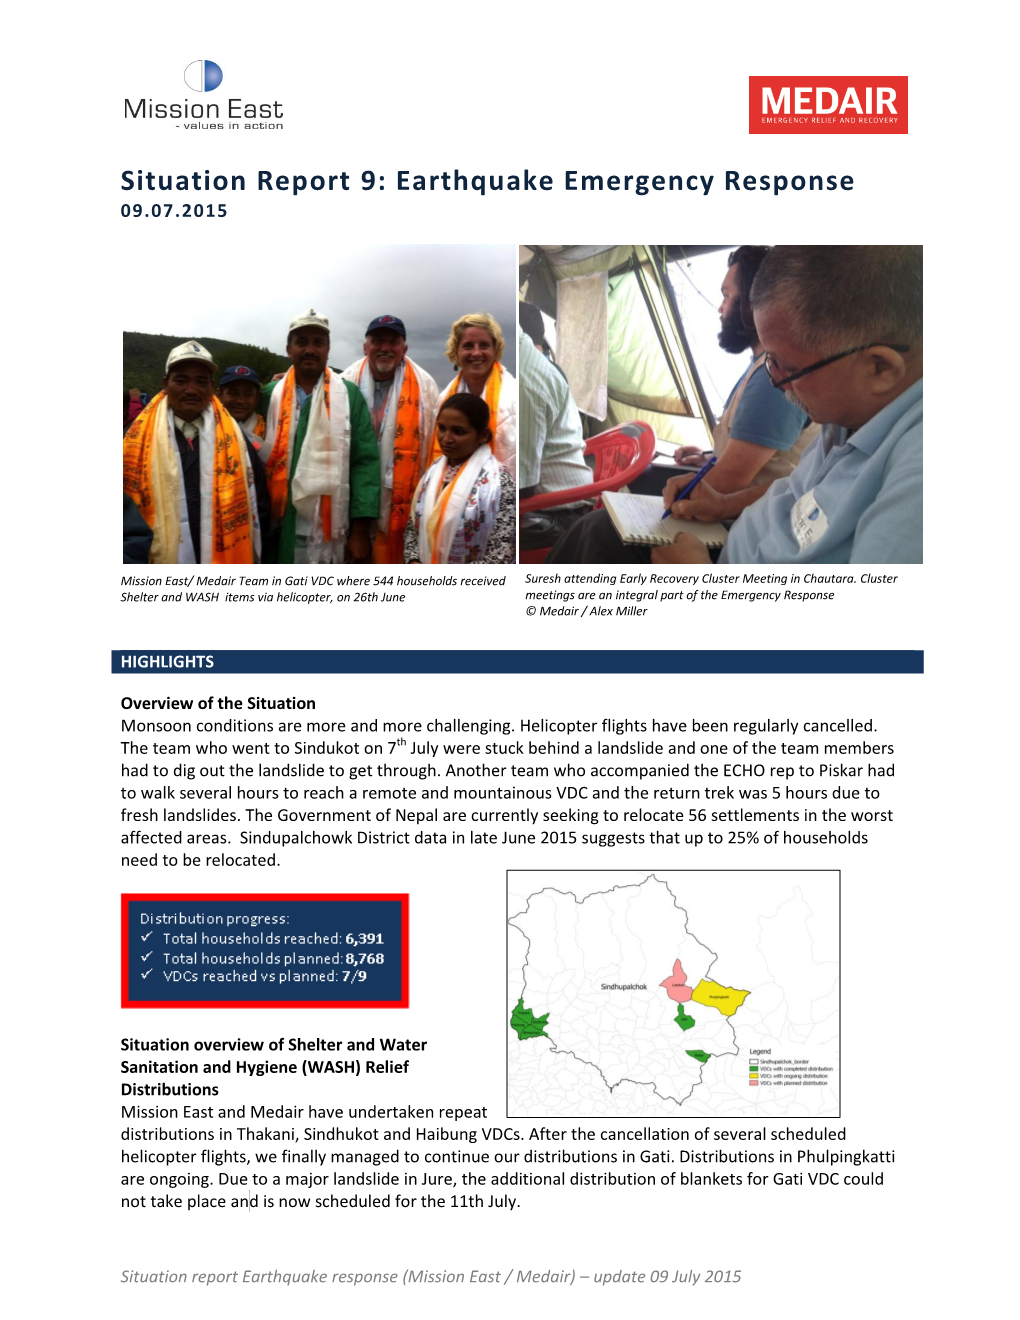 Situation Report 9: Earthquake Emergency Response 09.07.2015